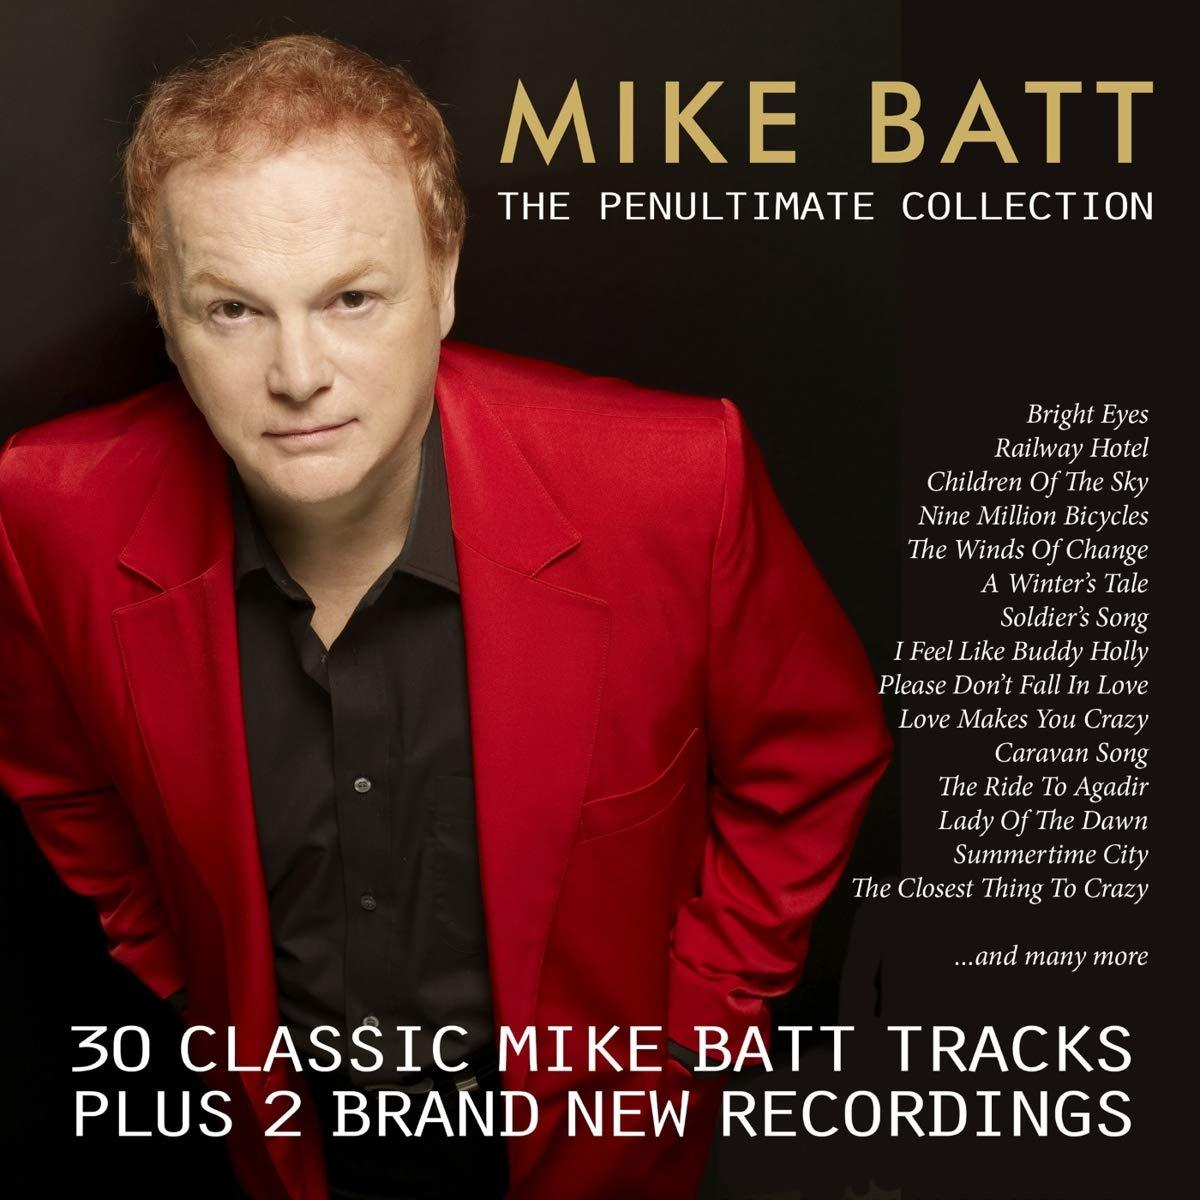 Mike The Penultimate - (CD) Collection Batt -